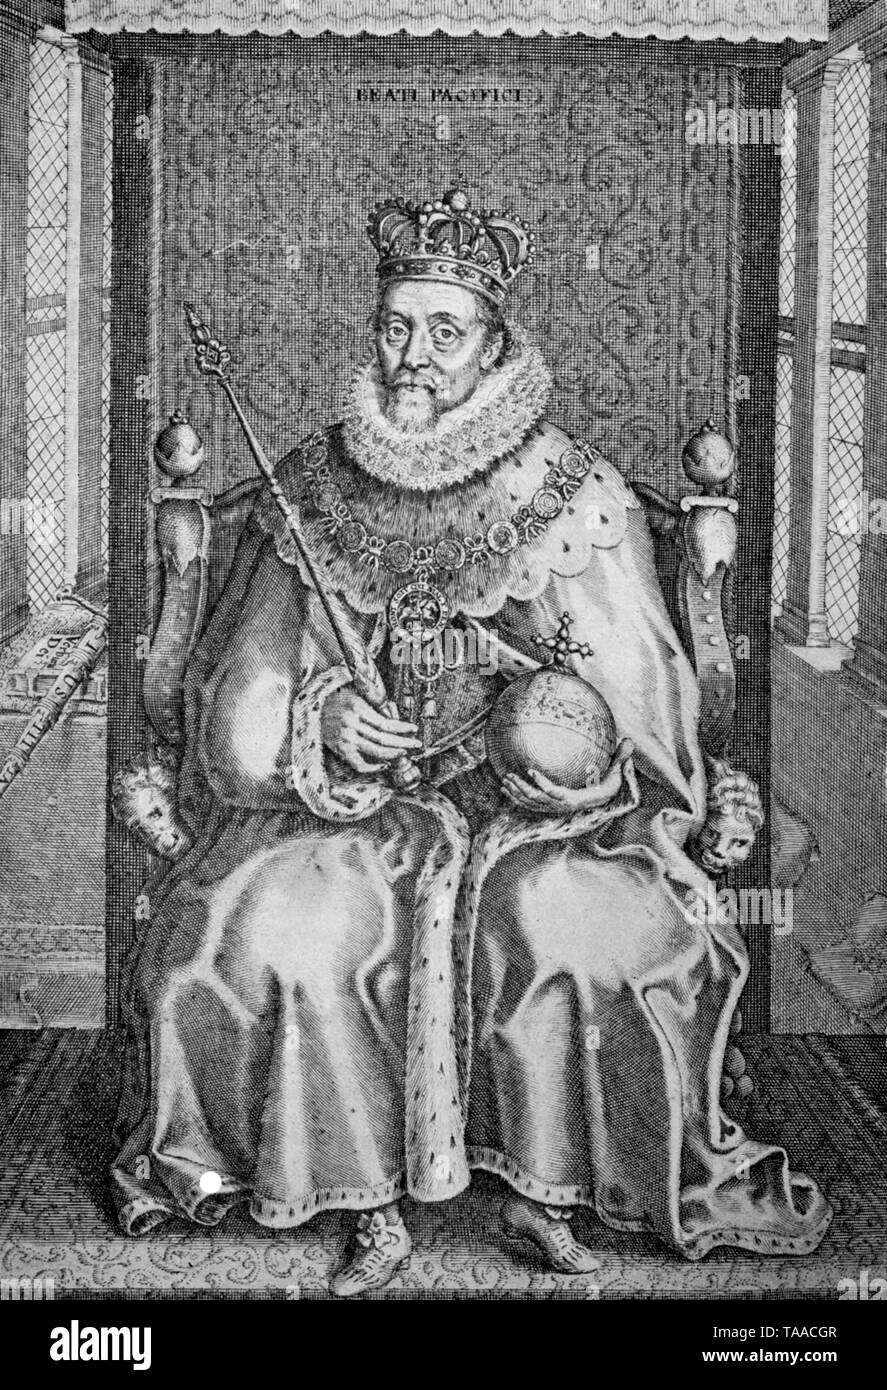 King James I as depicted in the frontispiece to his collected works, published in 1616. James VI and I (1566-1625) was King of Scotland as James VI and King of England and Ireland as James I from the union of the English and Scottish crowns in 1603 until his death. Stock Photo